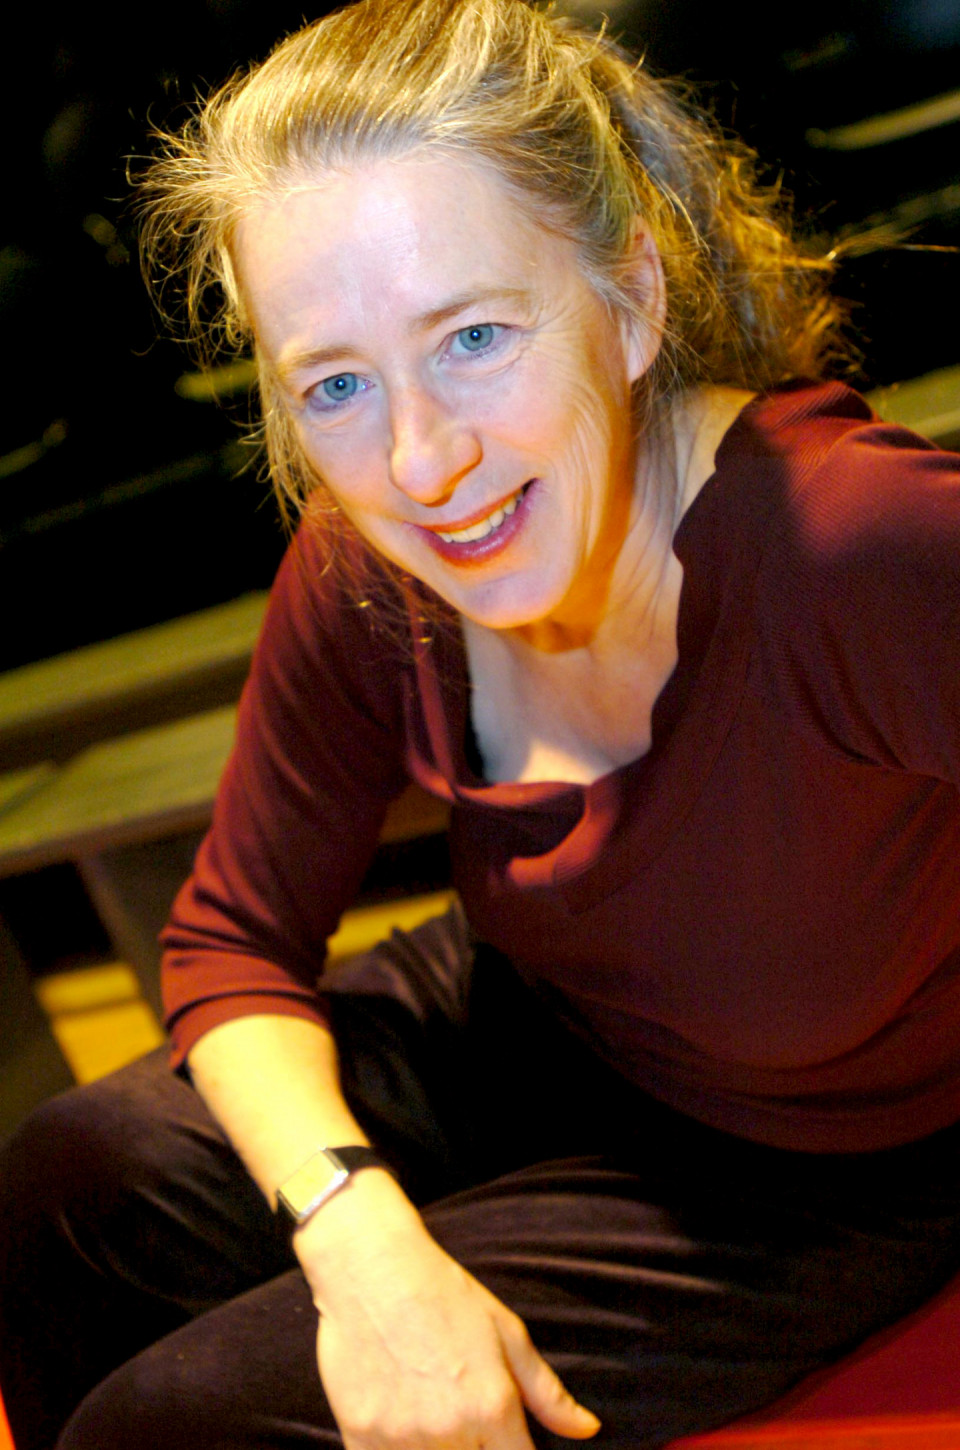 Diane Labrosse [Photograph: Christian Galley, 2007]